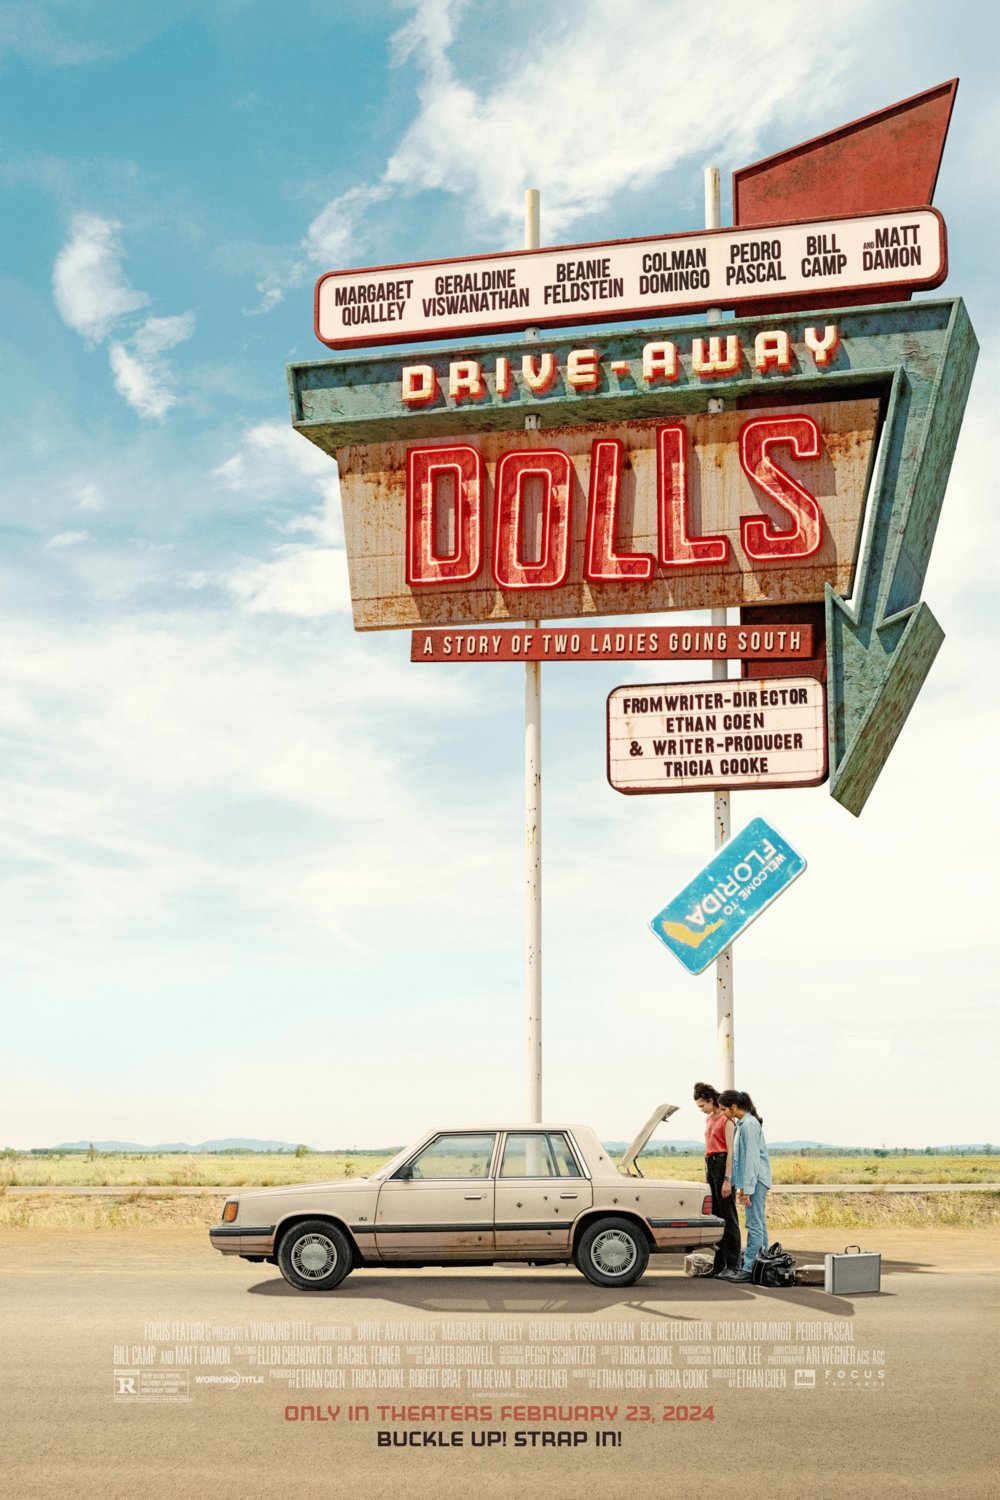 Poster of the movie Drive-Away Dolls